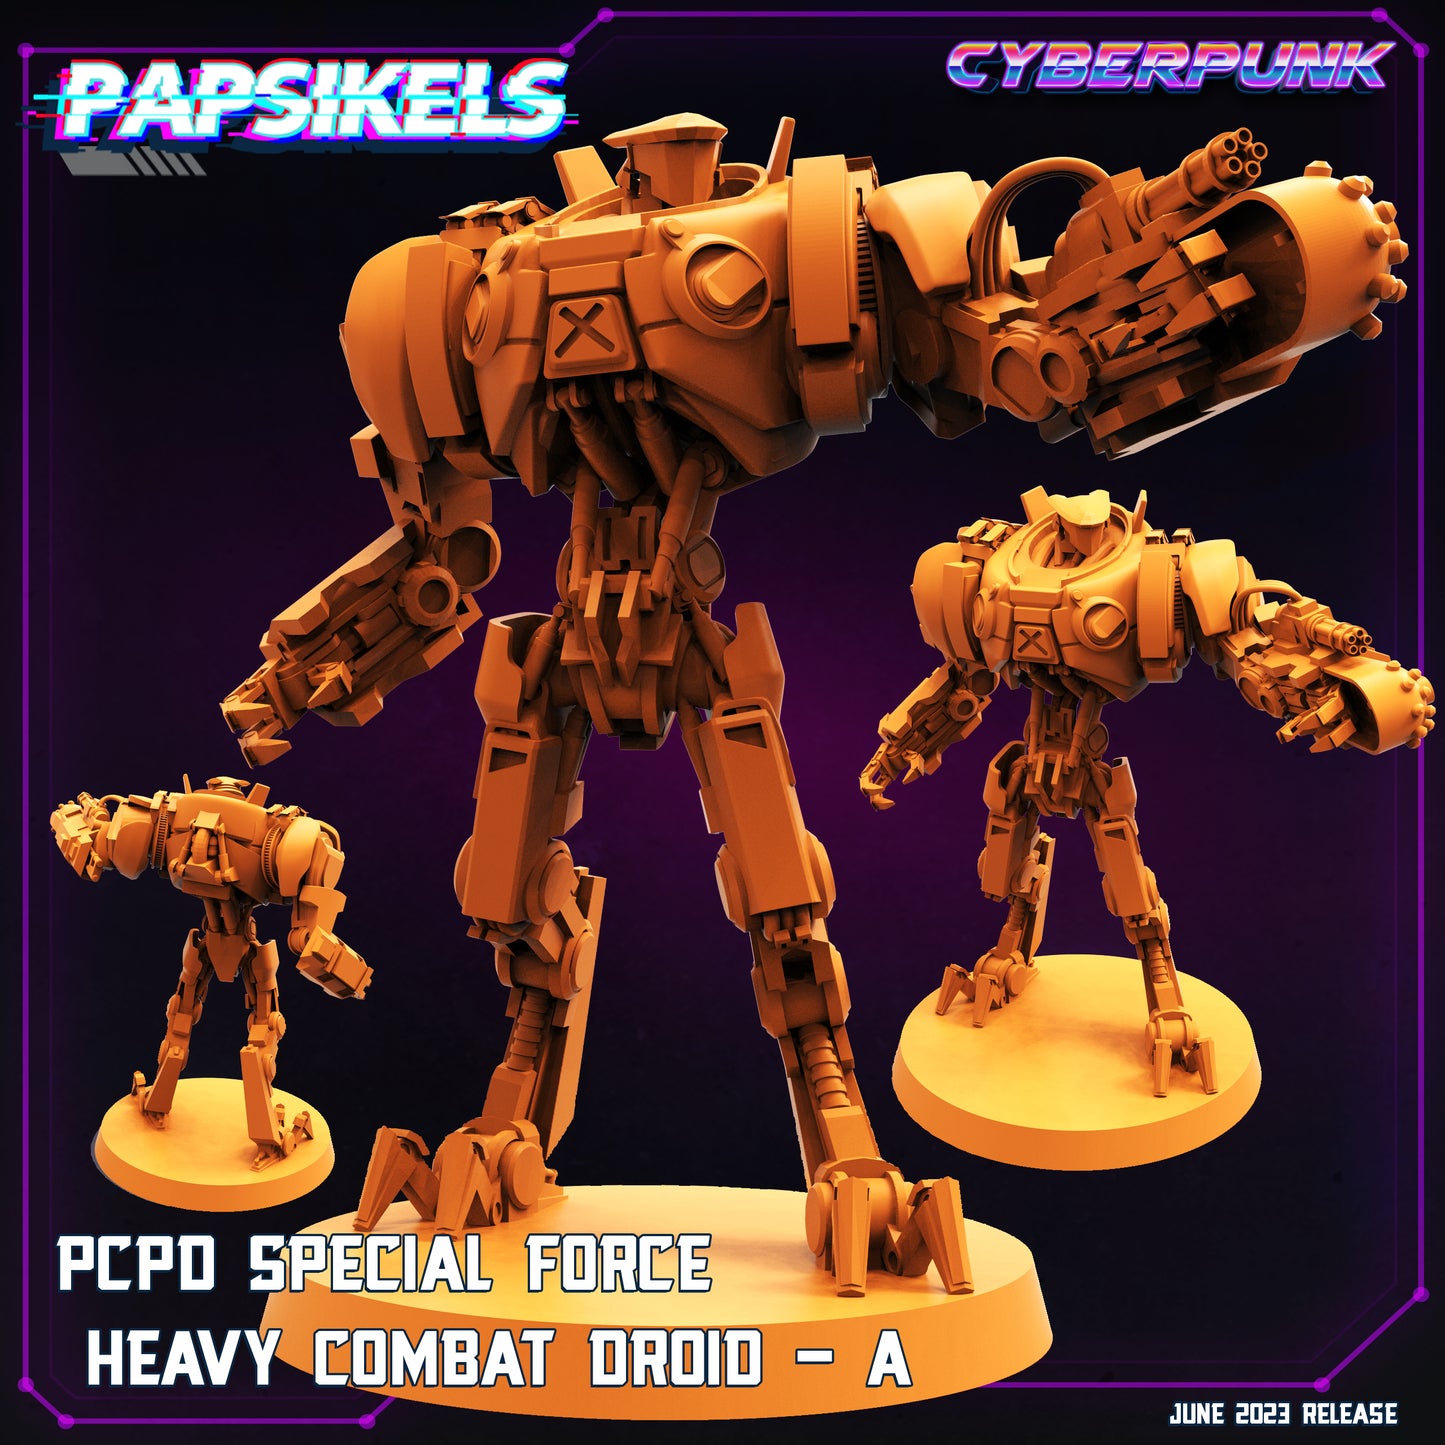 PCPD Special Force Heavy Combat Droid (2 variantes)